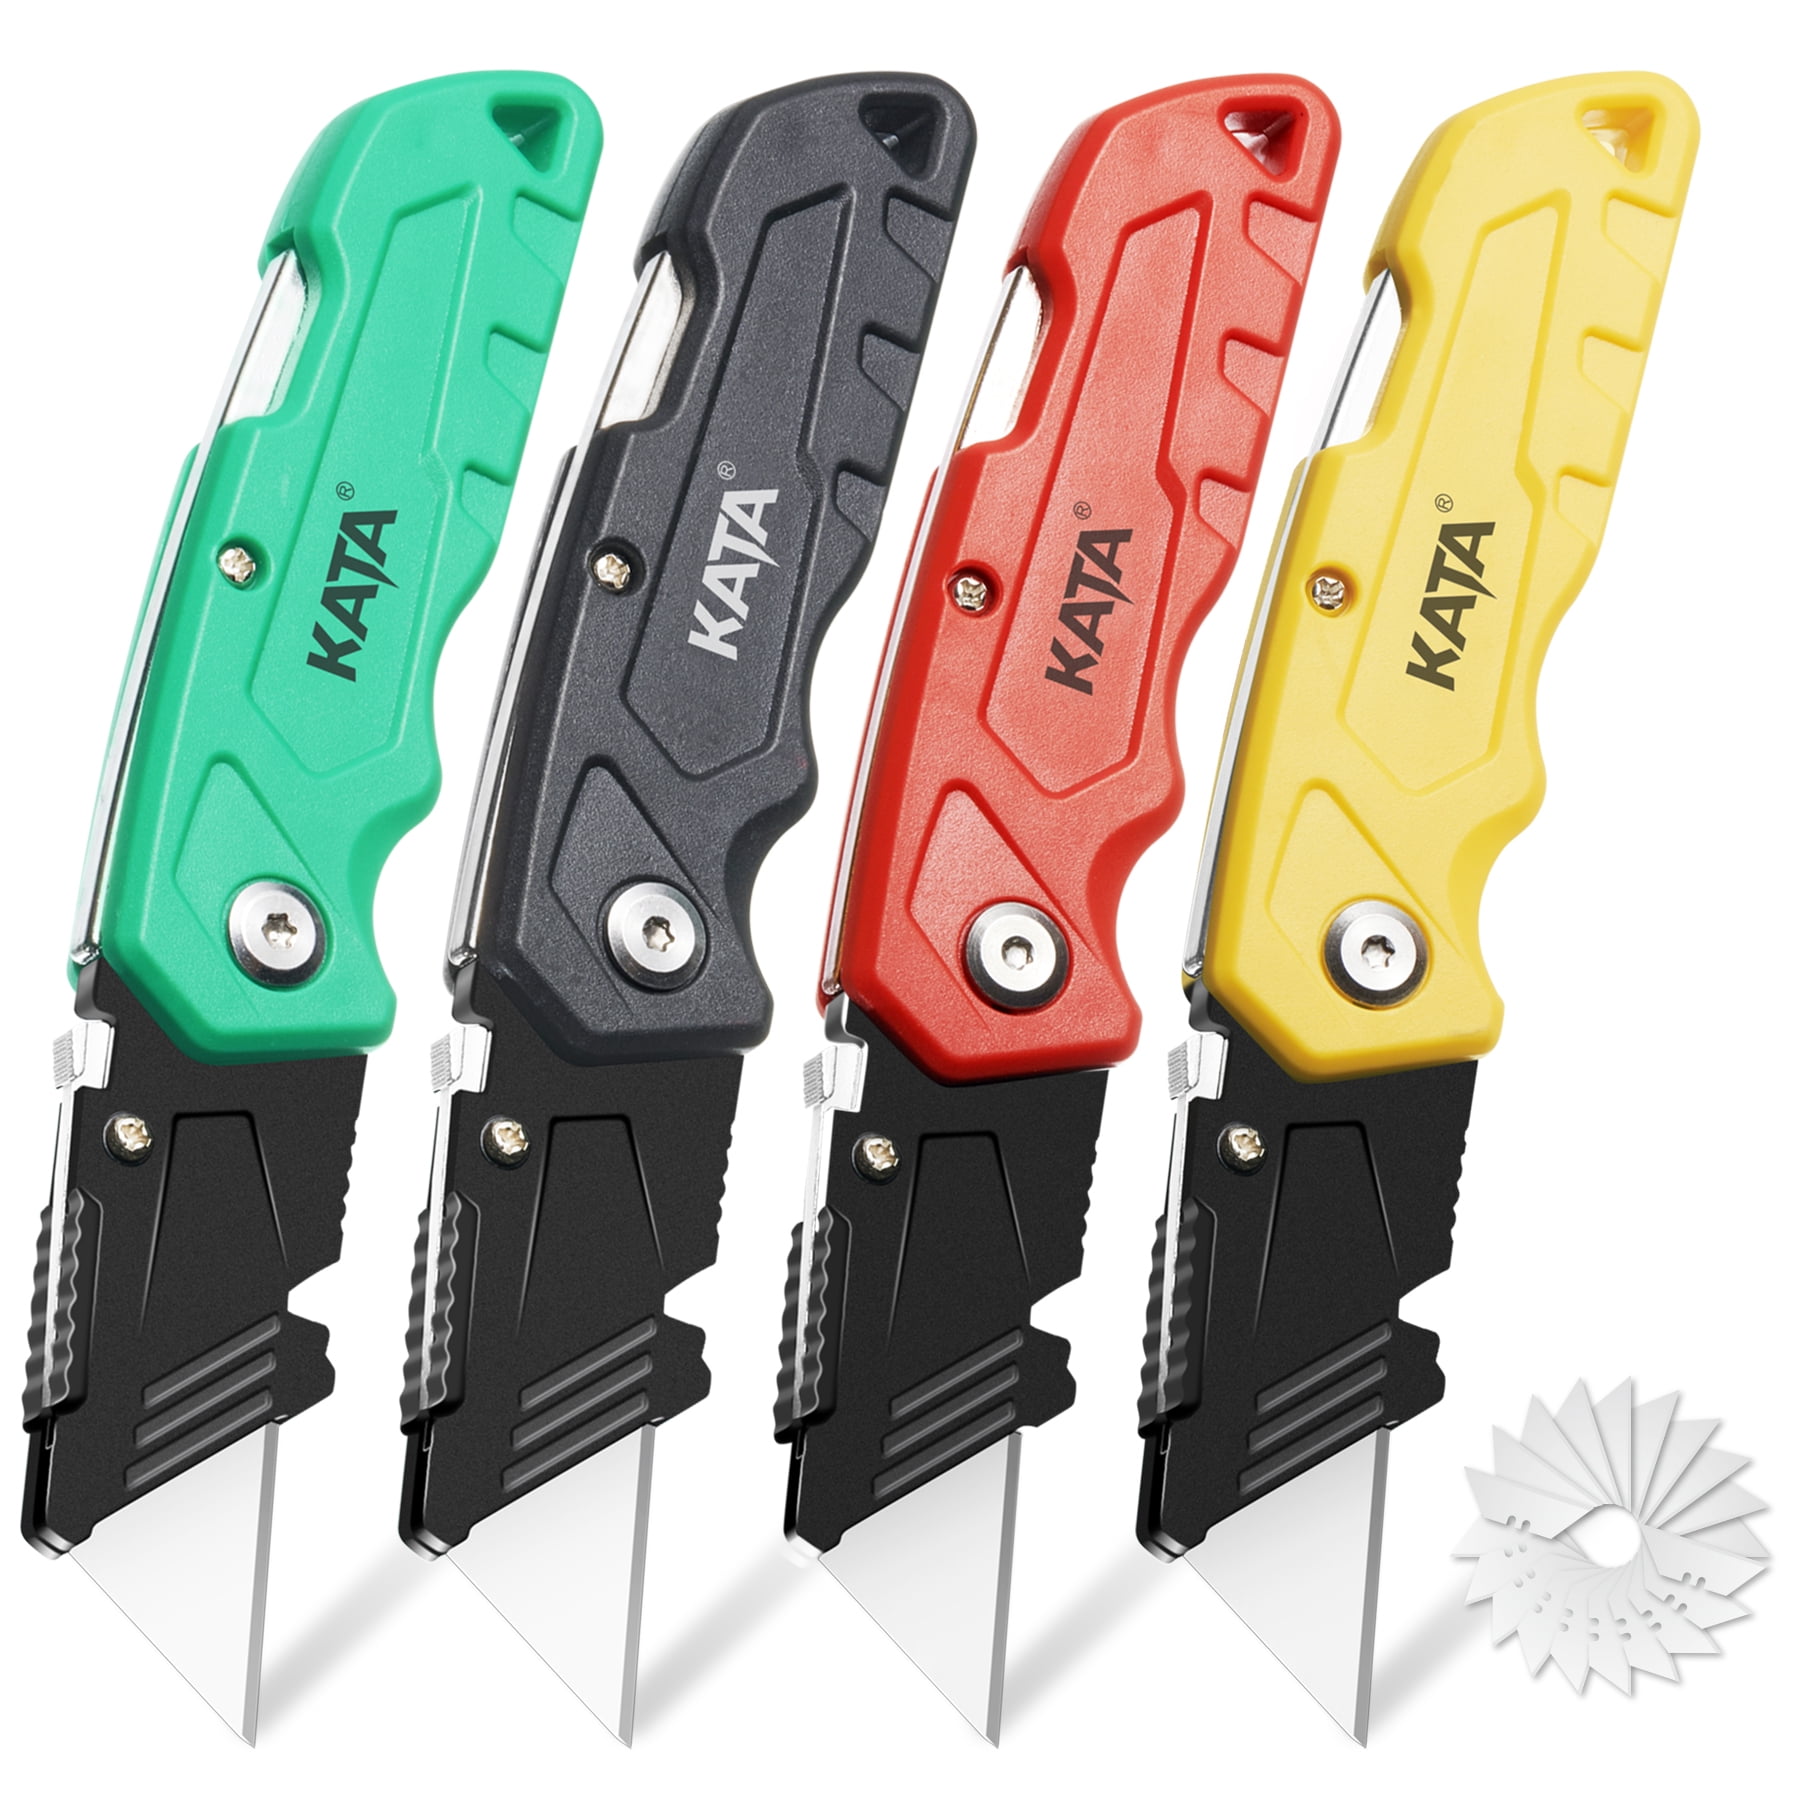 KATA 4-PACK Folding Utility Knife, Box Cutter with Belt Clip